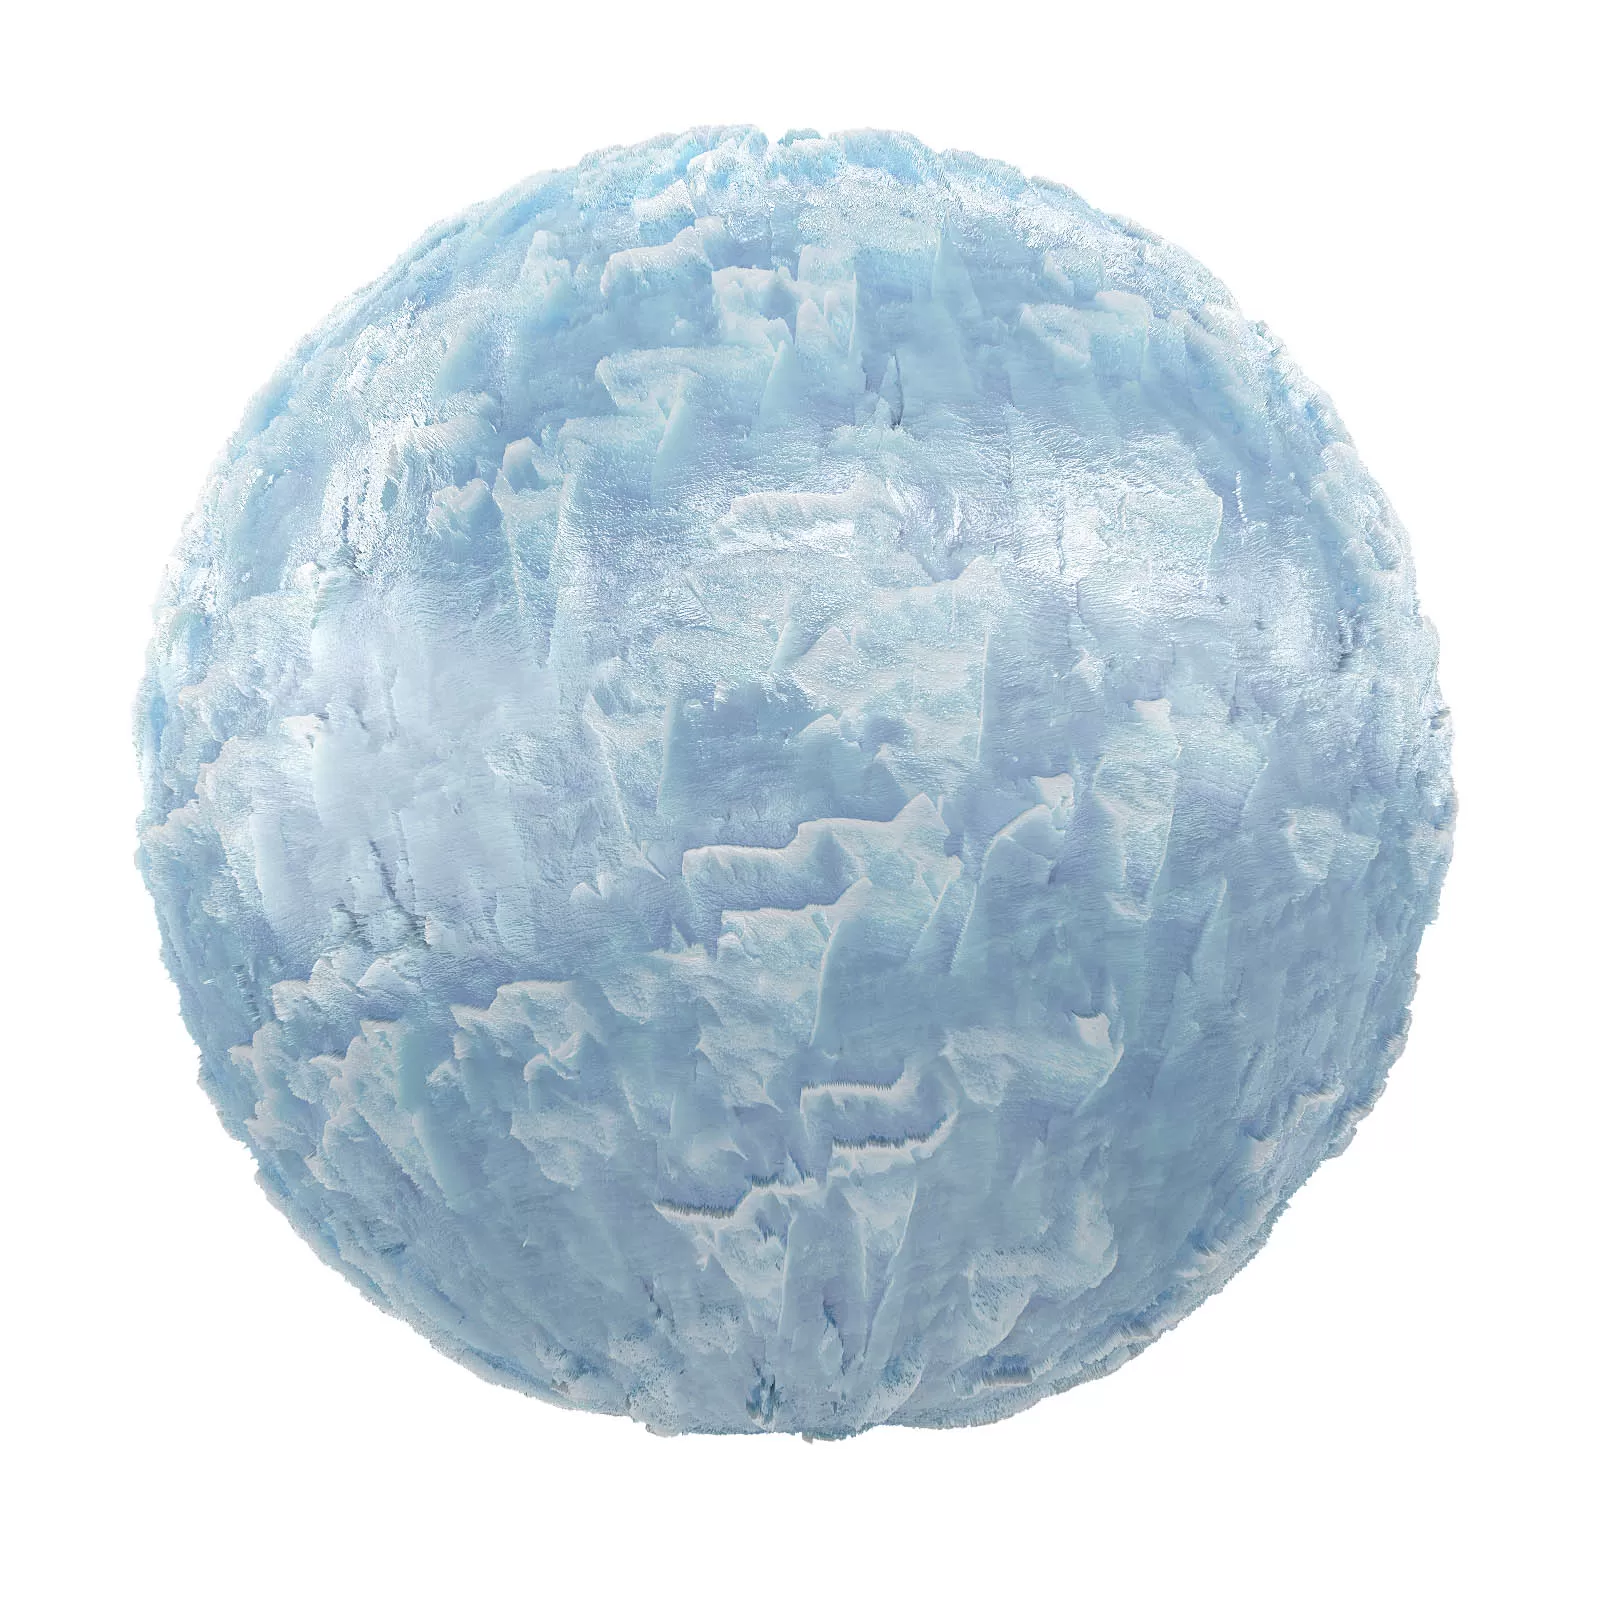 PBR CGAXIS TEXTURES – SNOW – Ice 4